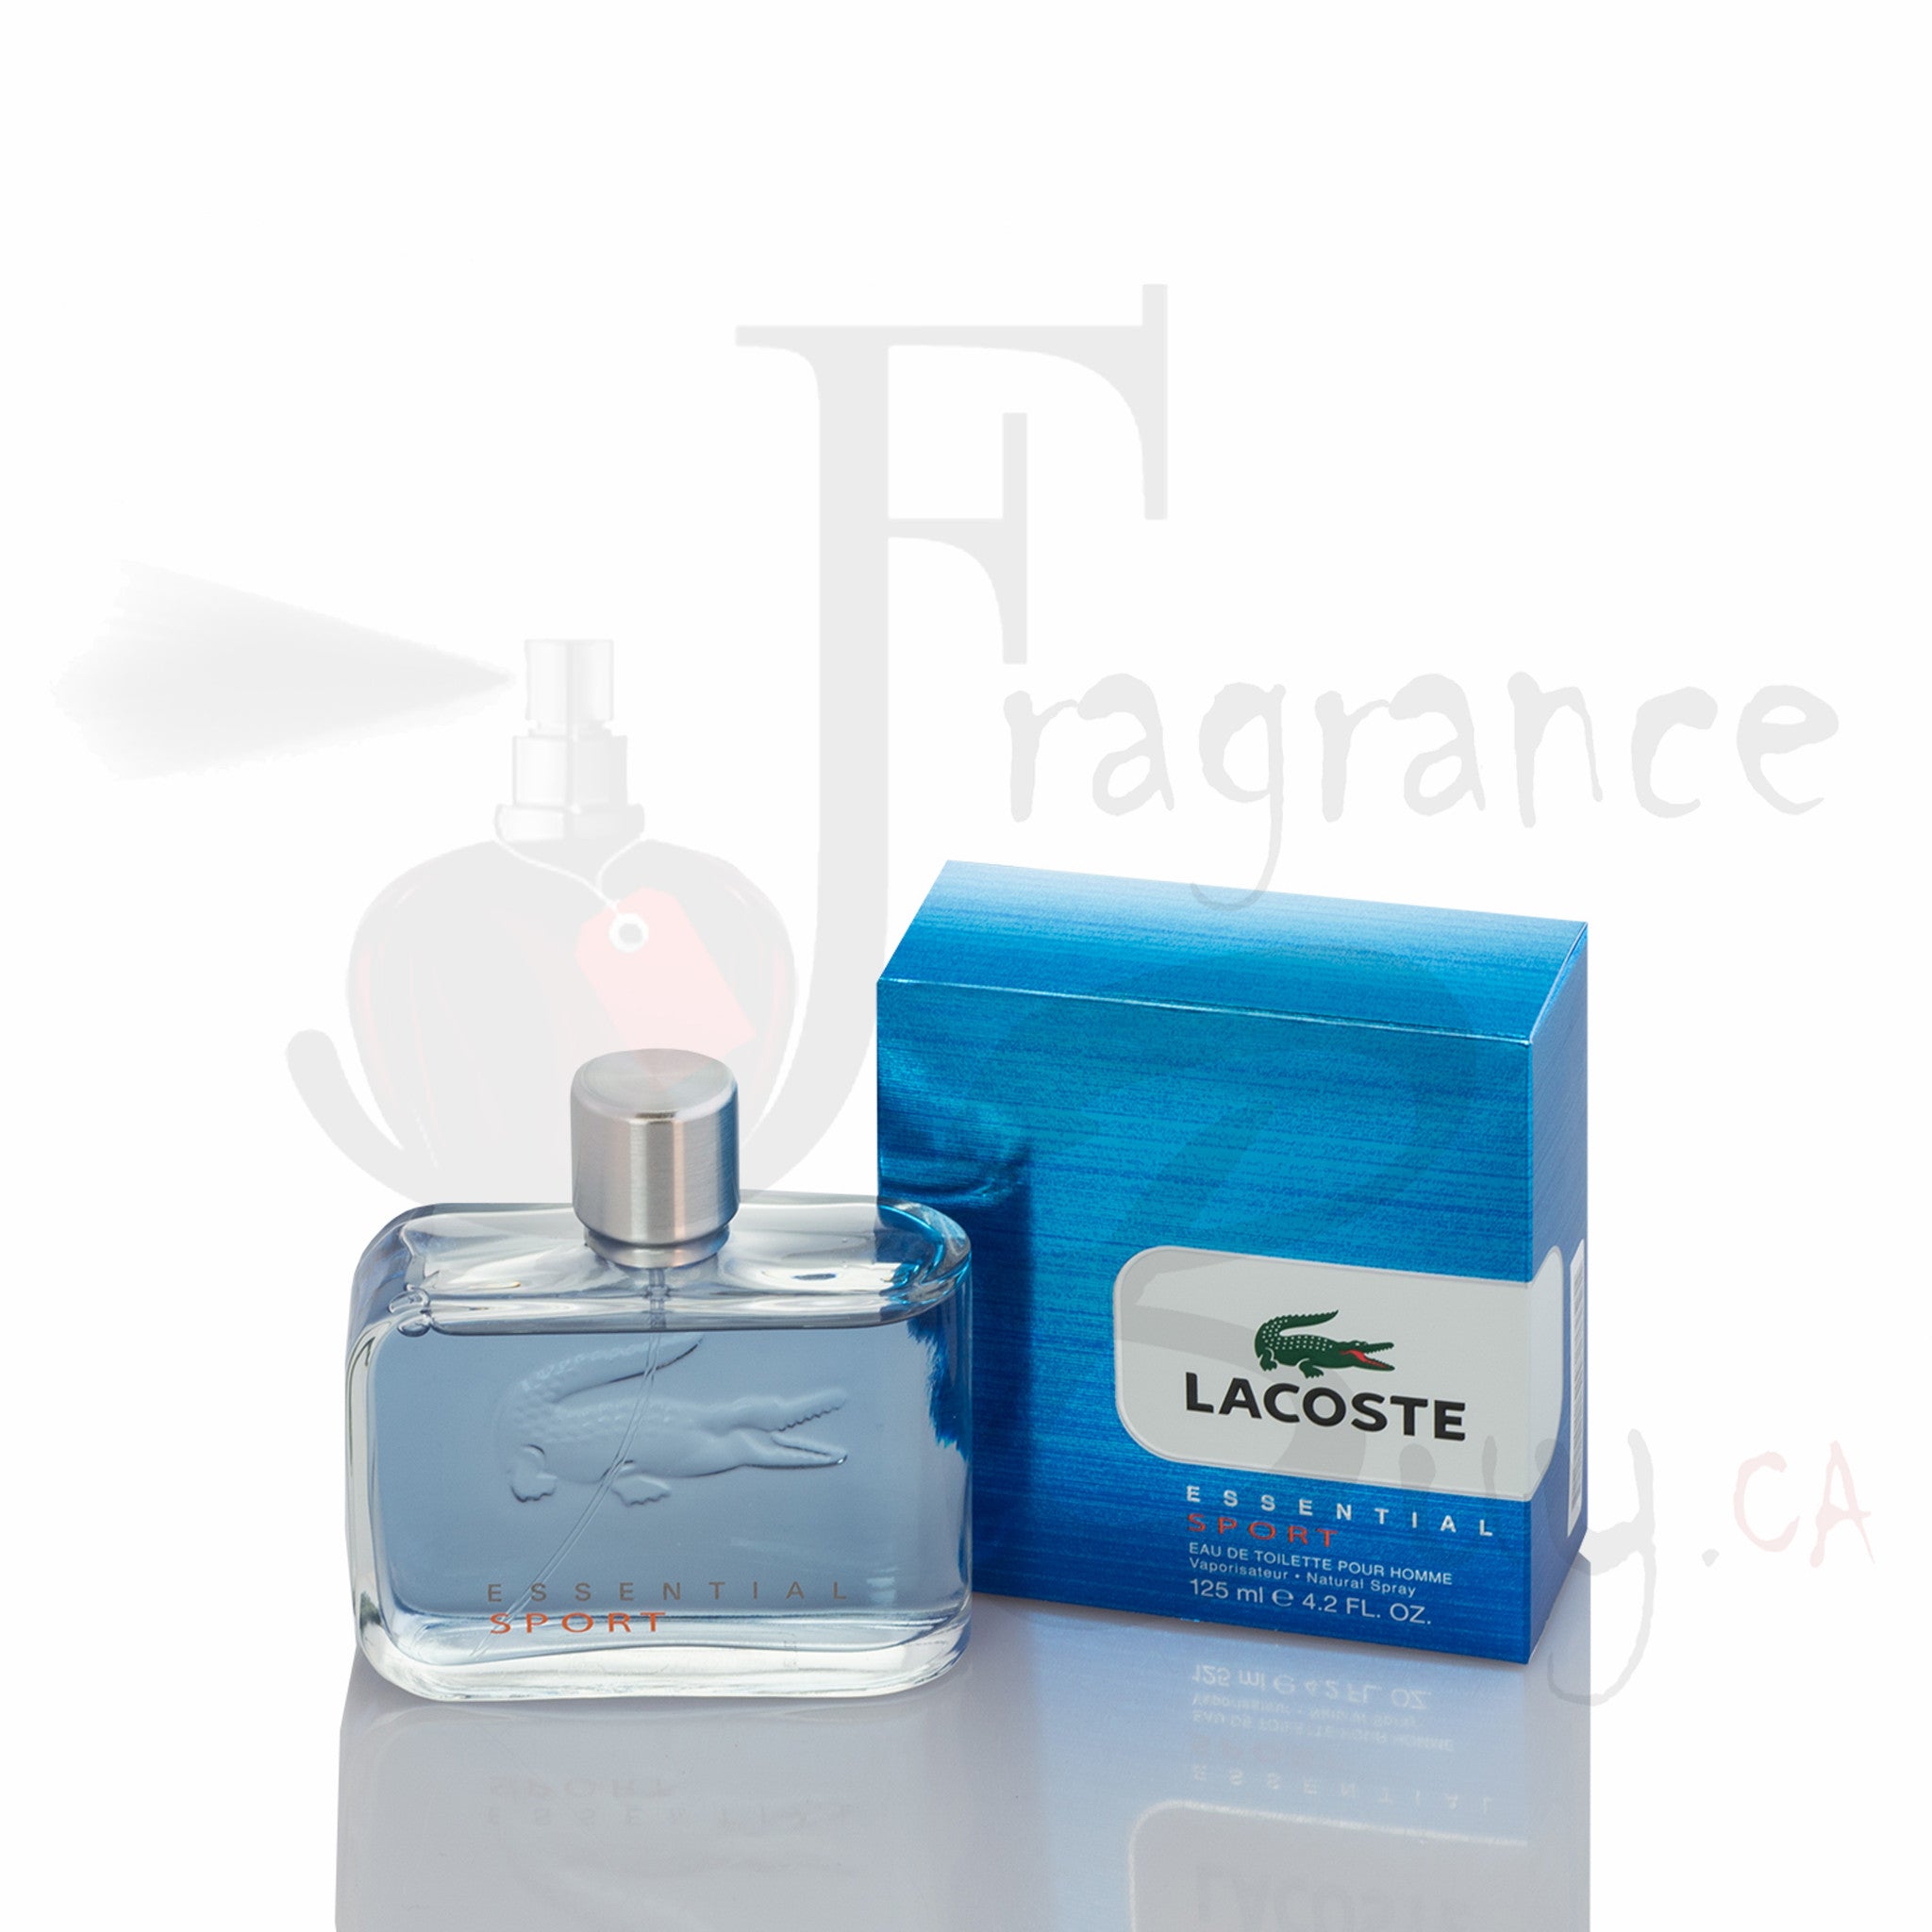 Fragrancebuy — Discontinued and hard-to-find Gems at Fragrance Buy